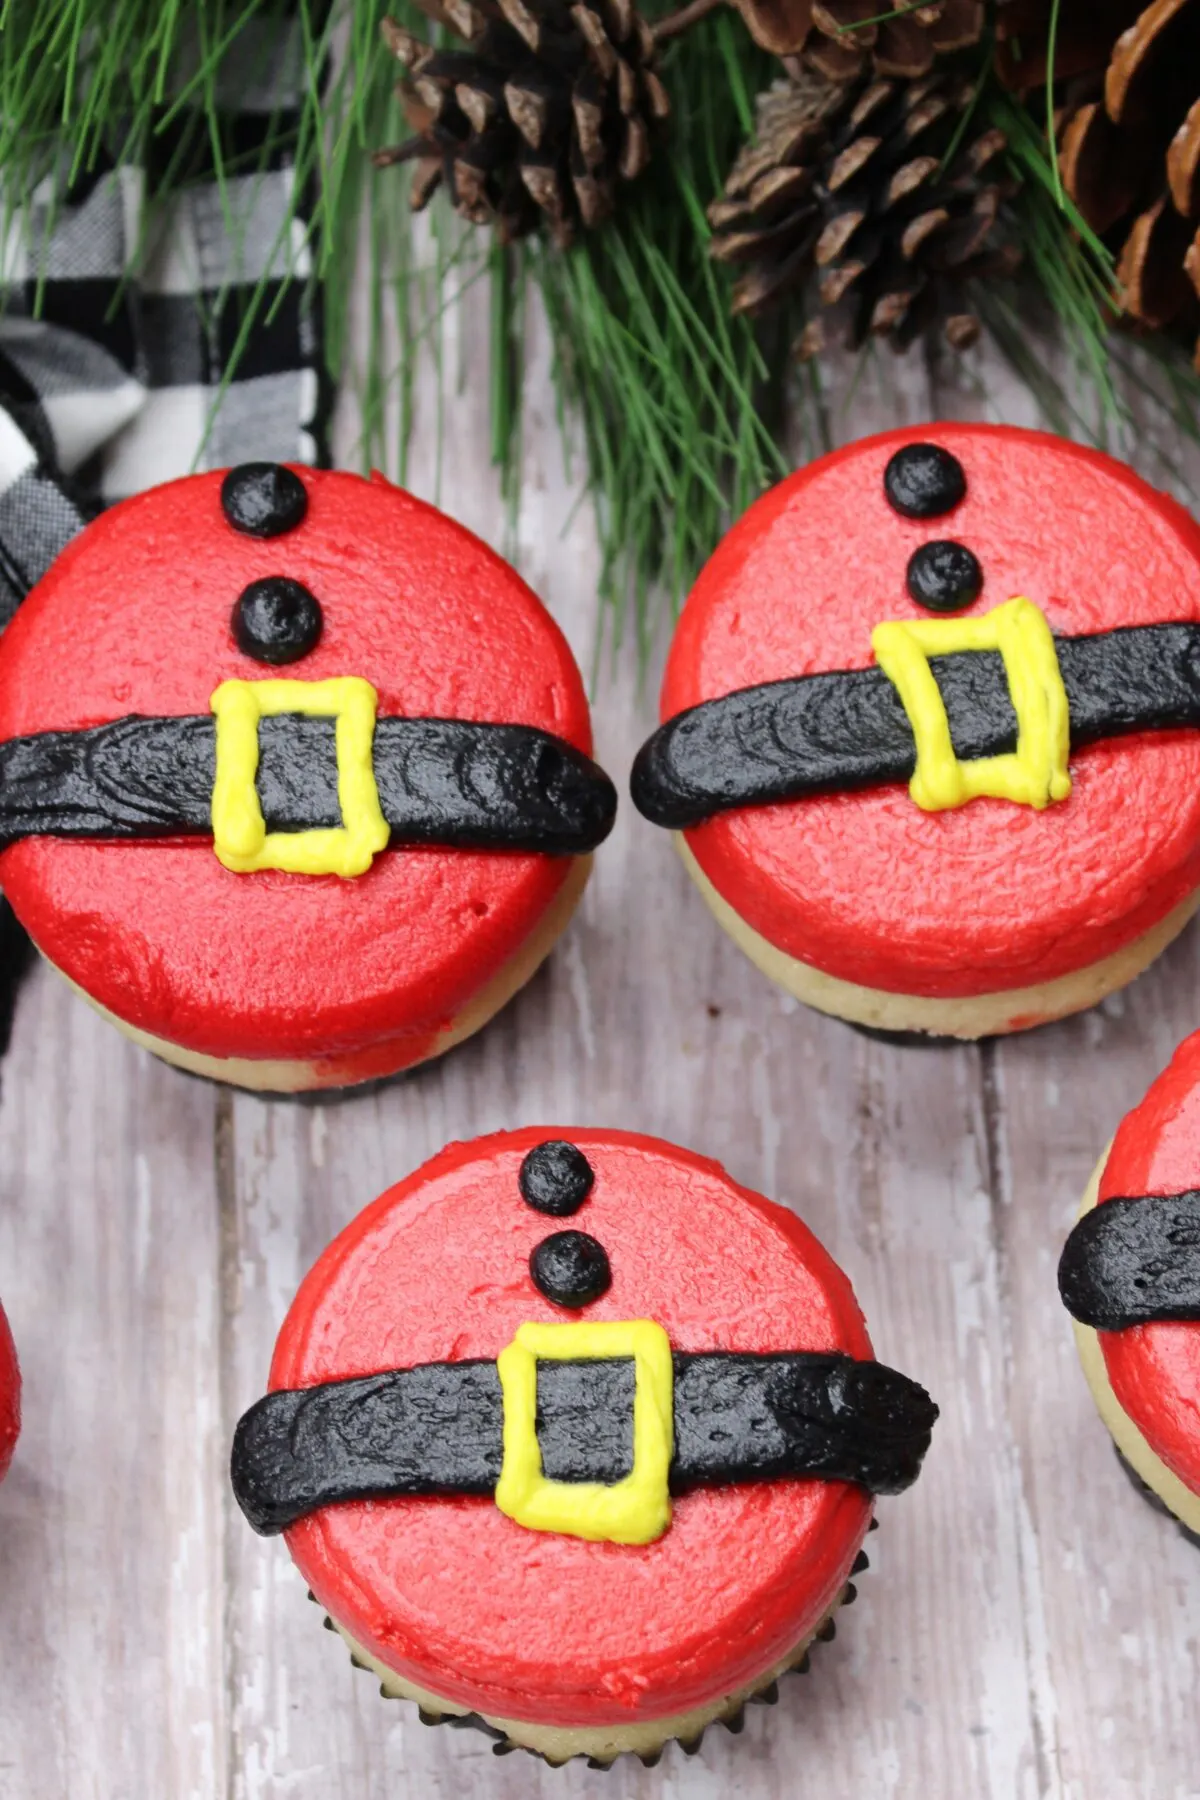 These delicious Santa belly cupcakes are perfect for your next Christmas party! They're easy to make and everyone will love them.